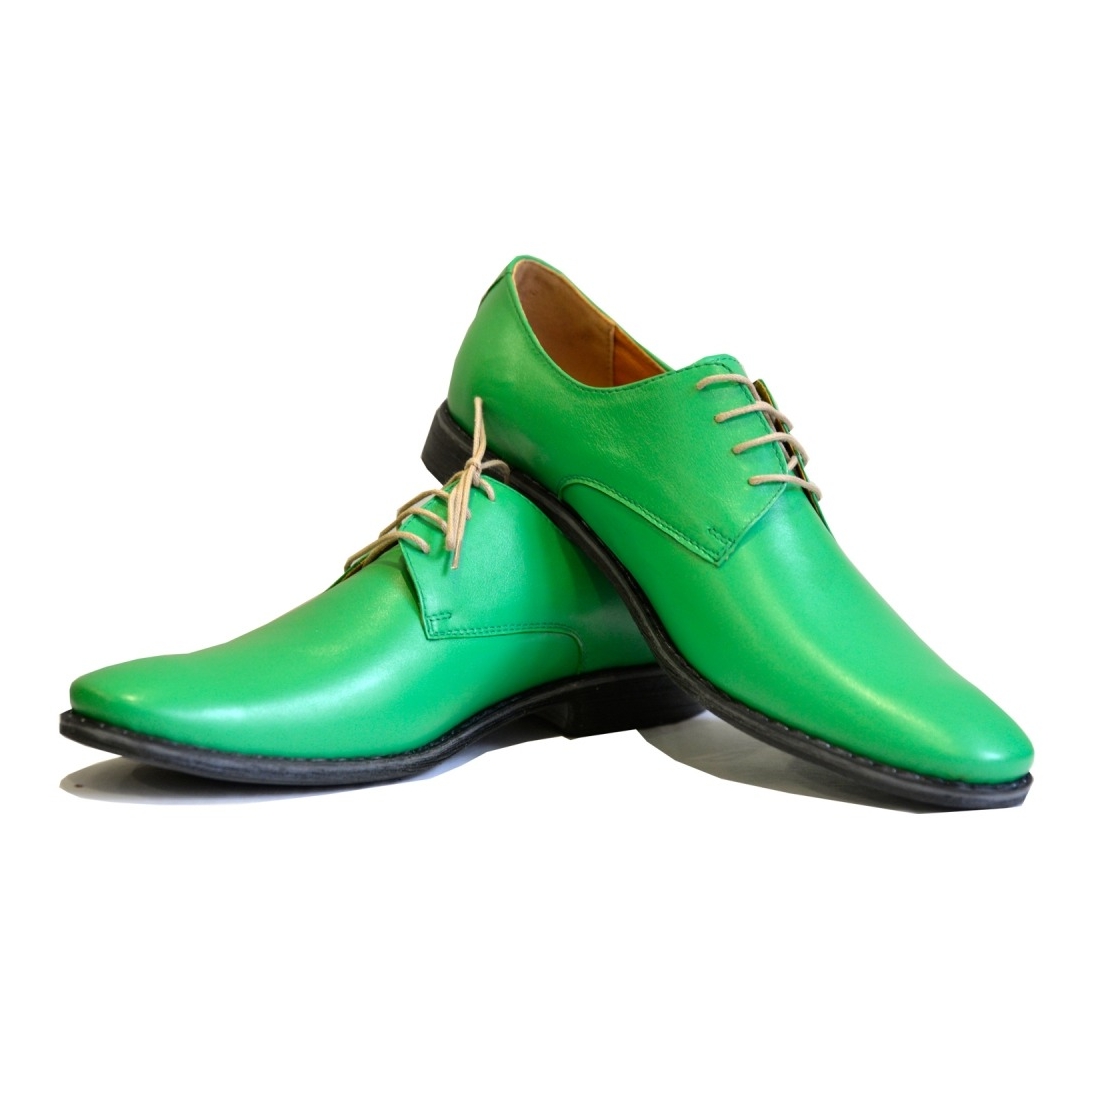 Modello No. 190 - Green Lace-Up Oxfords Dress Shoes - Cowhide Smooth ...